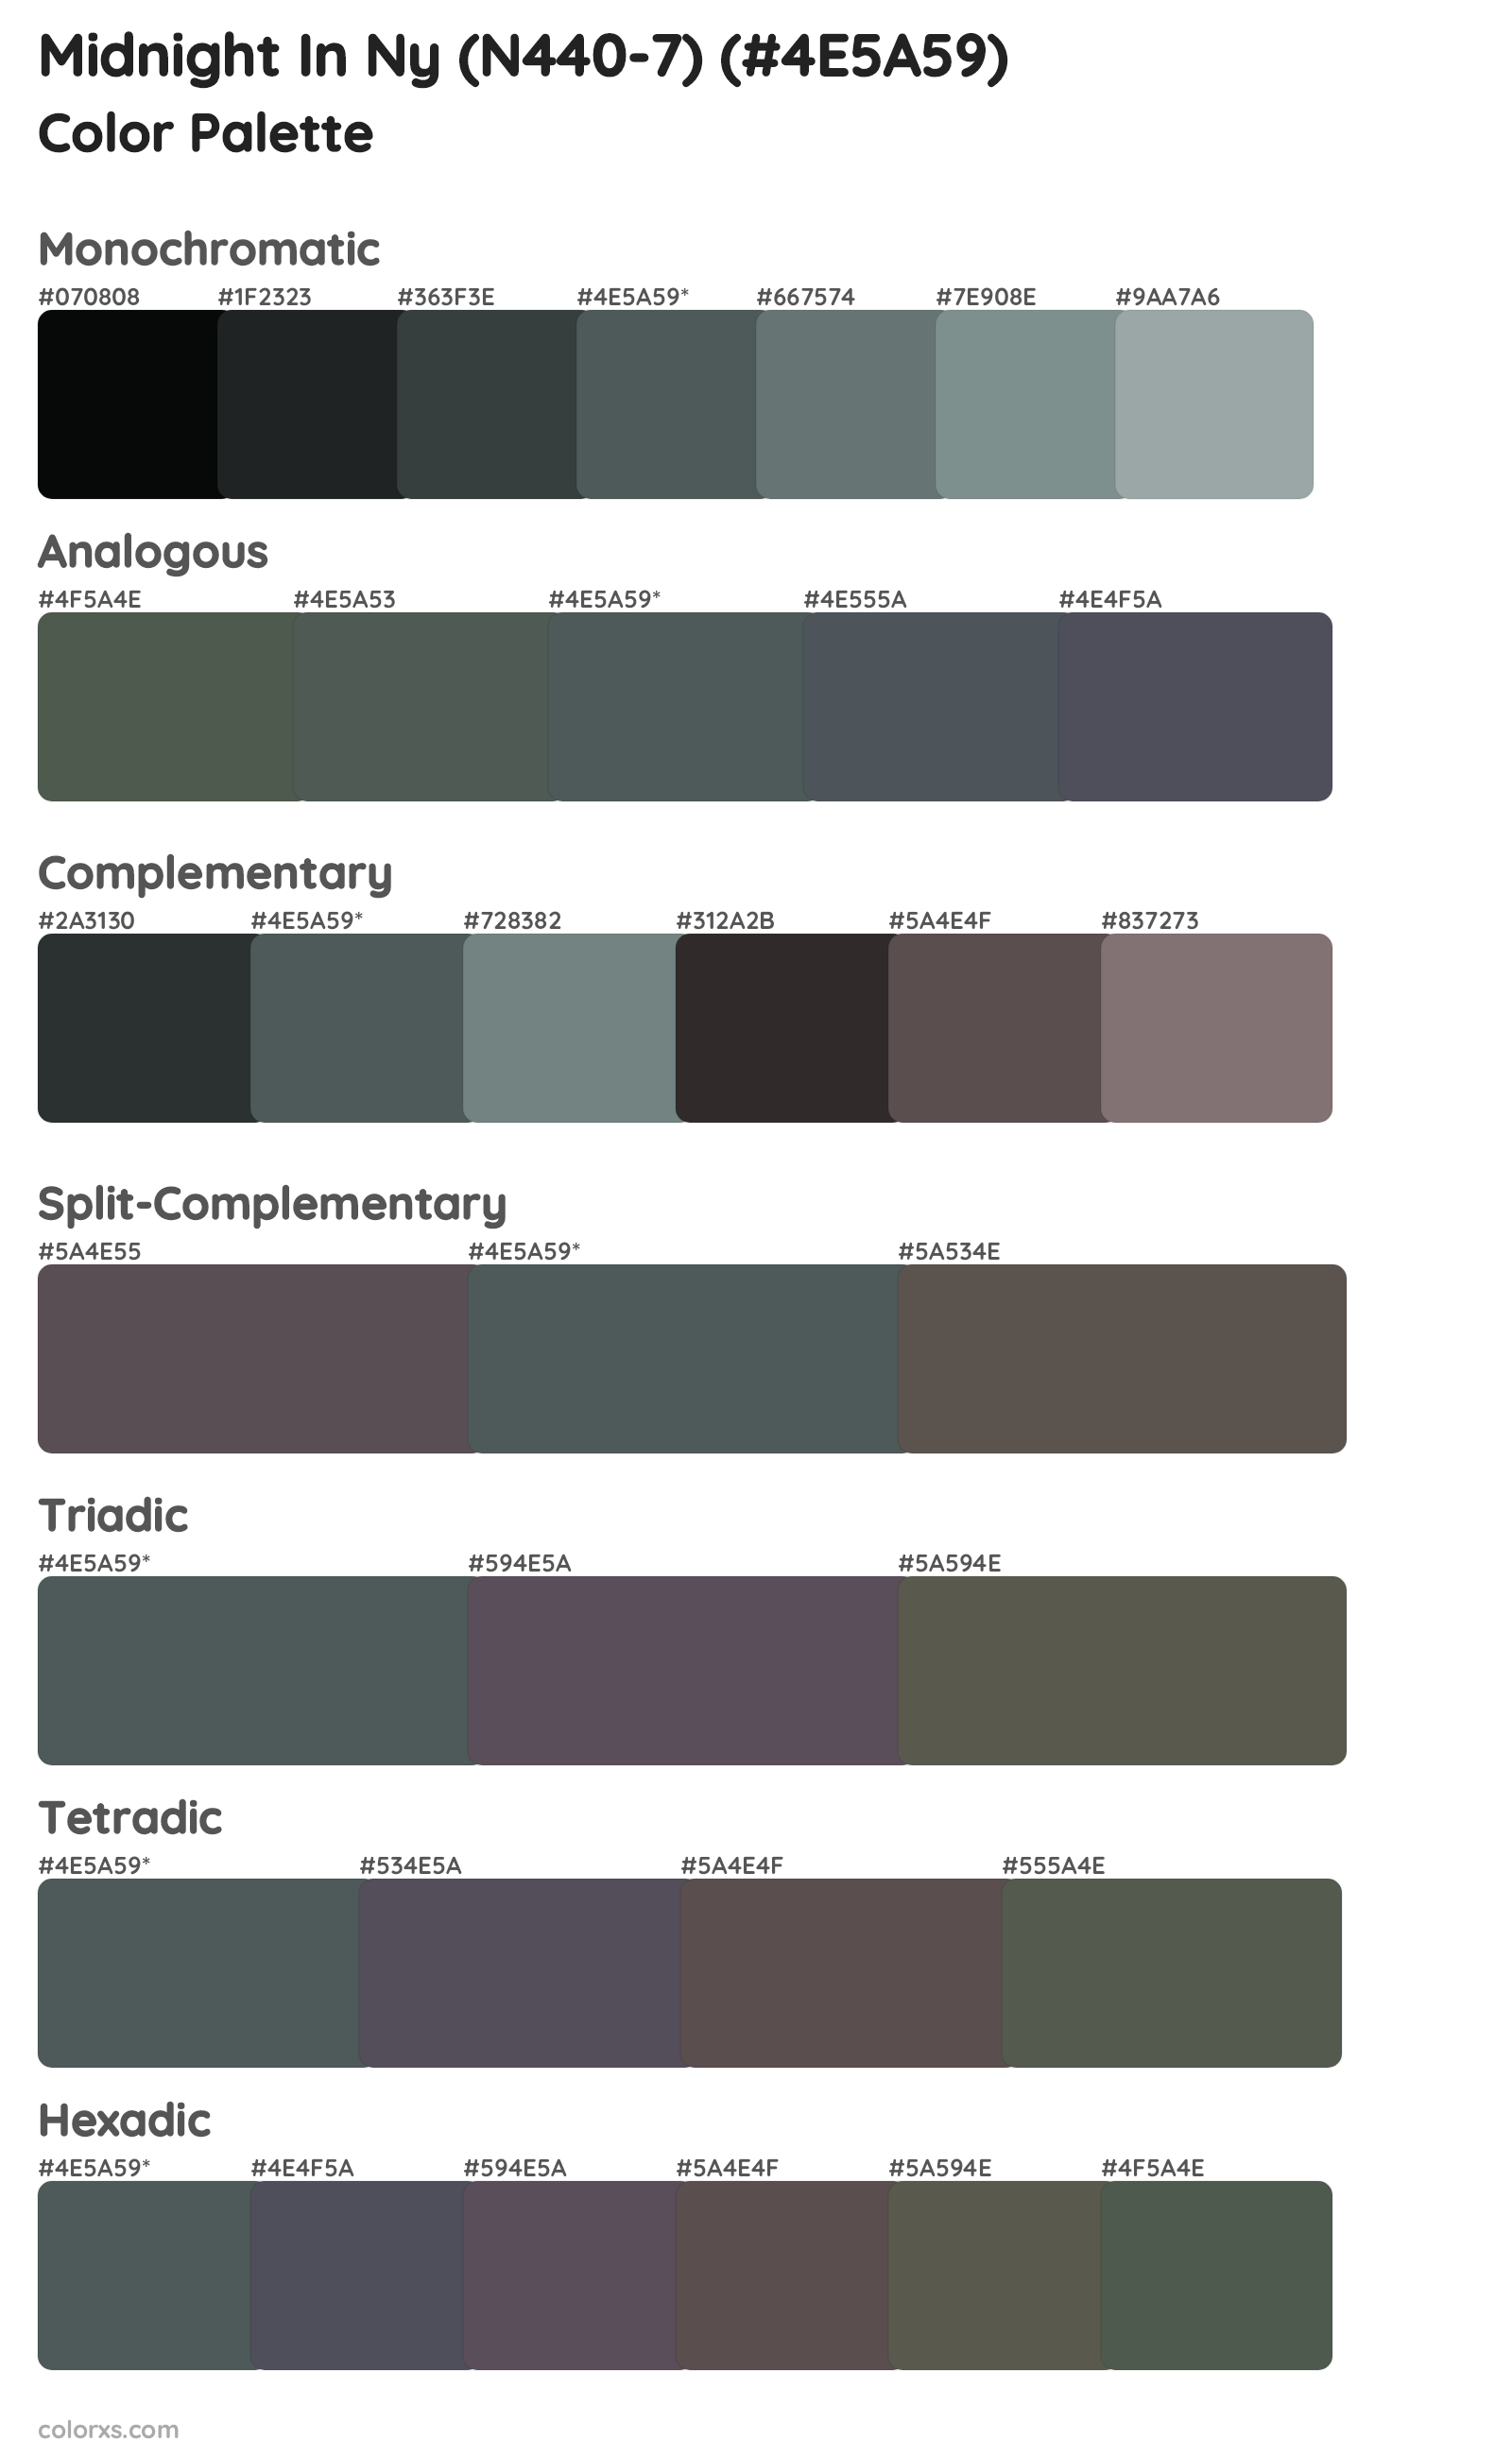 Midnight In Ny (N440-7) Color Scheme Palettes